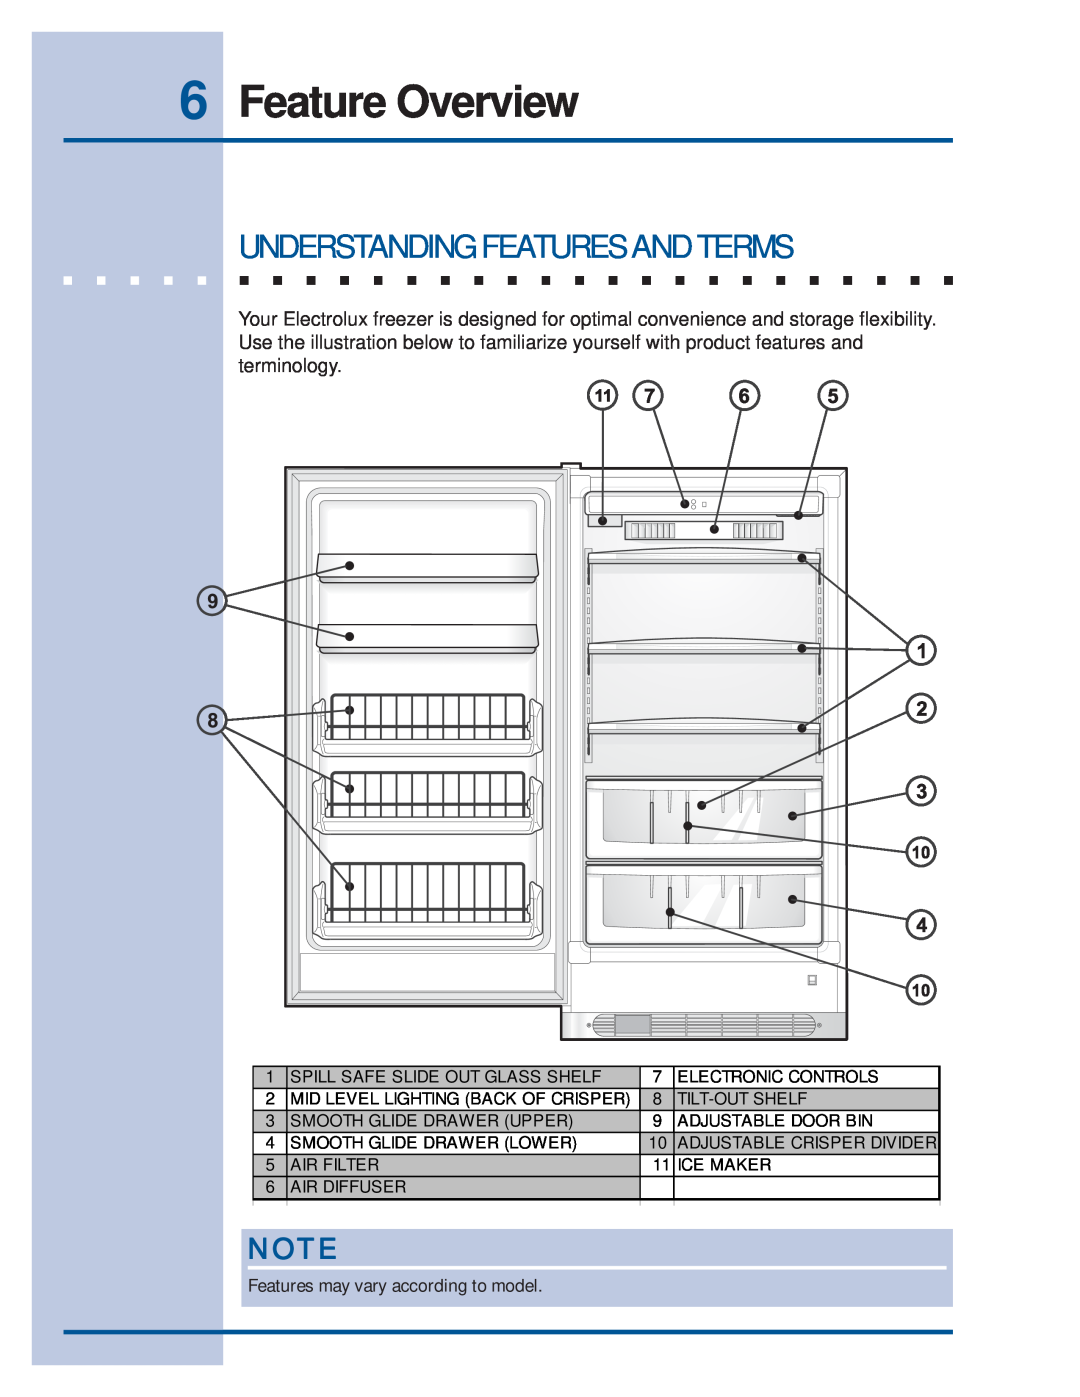 Electrolux 297122900 (0608) manual Feature Overview, Understanding Features And Terms 